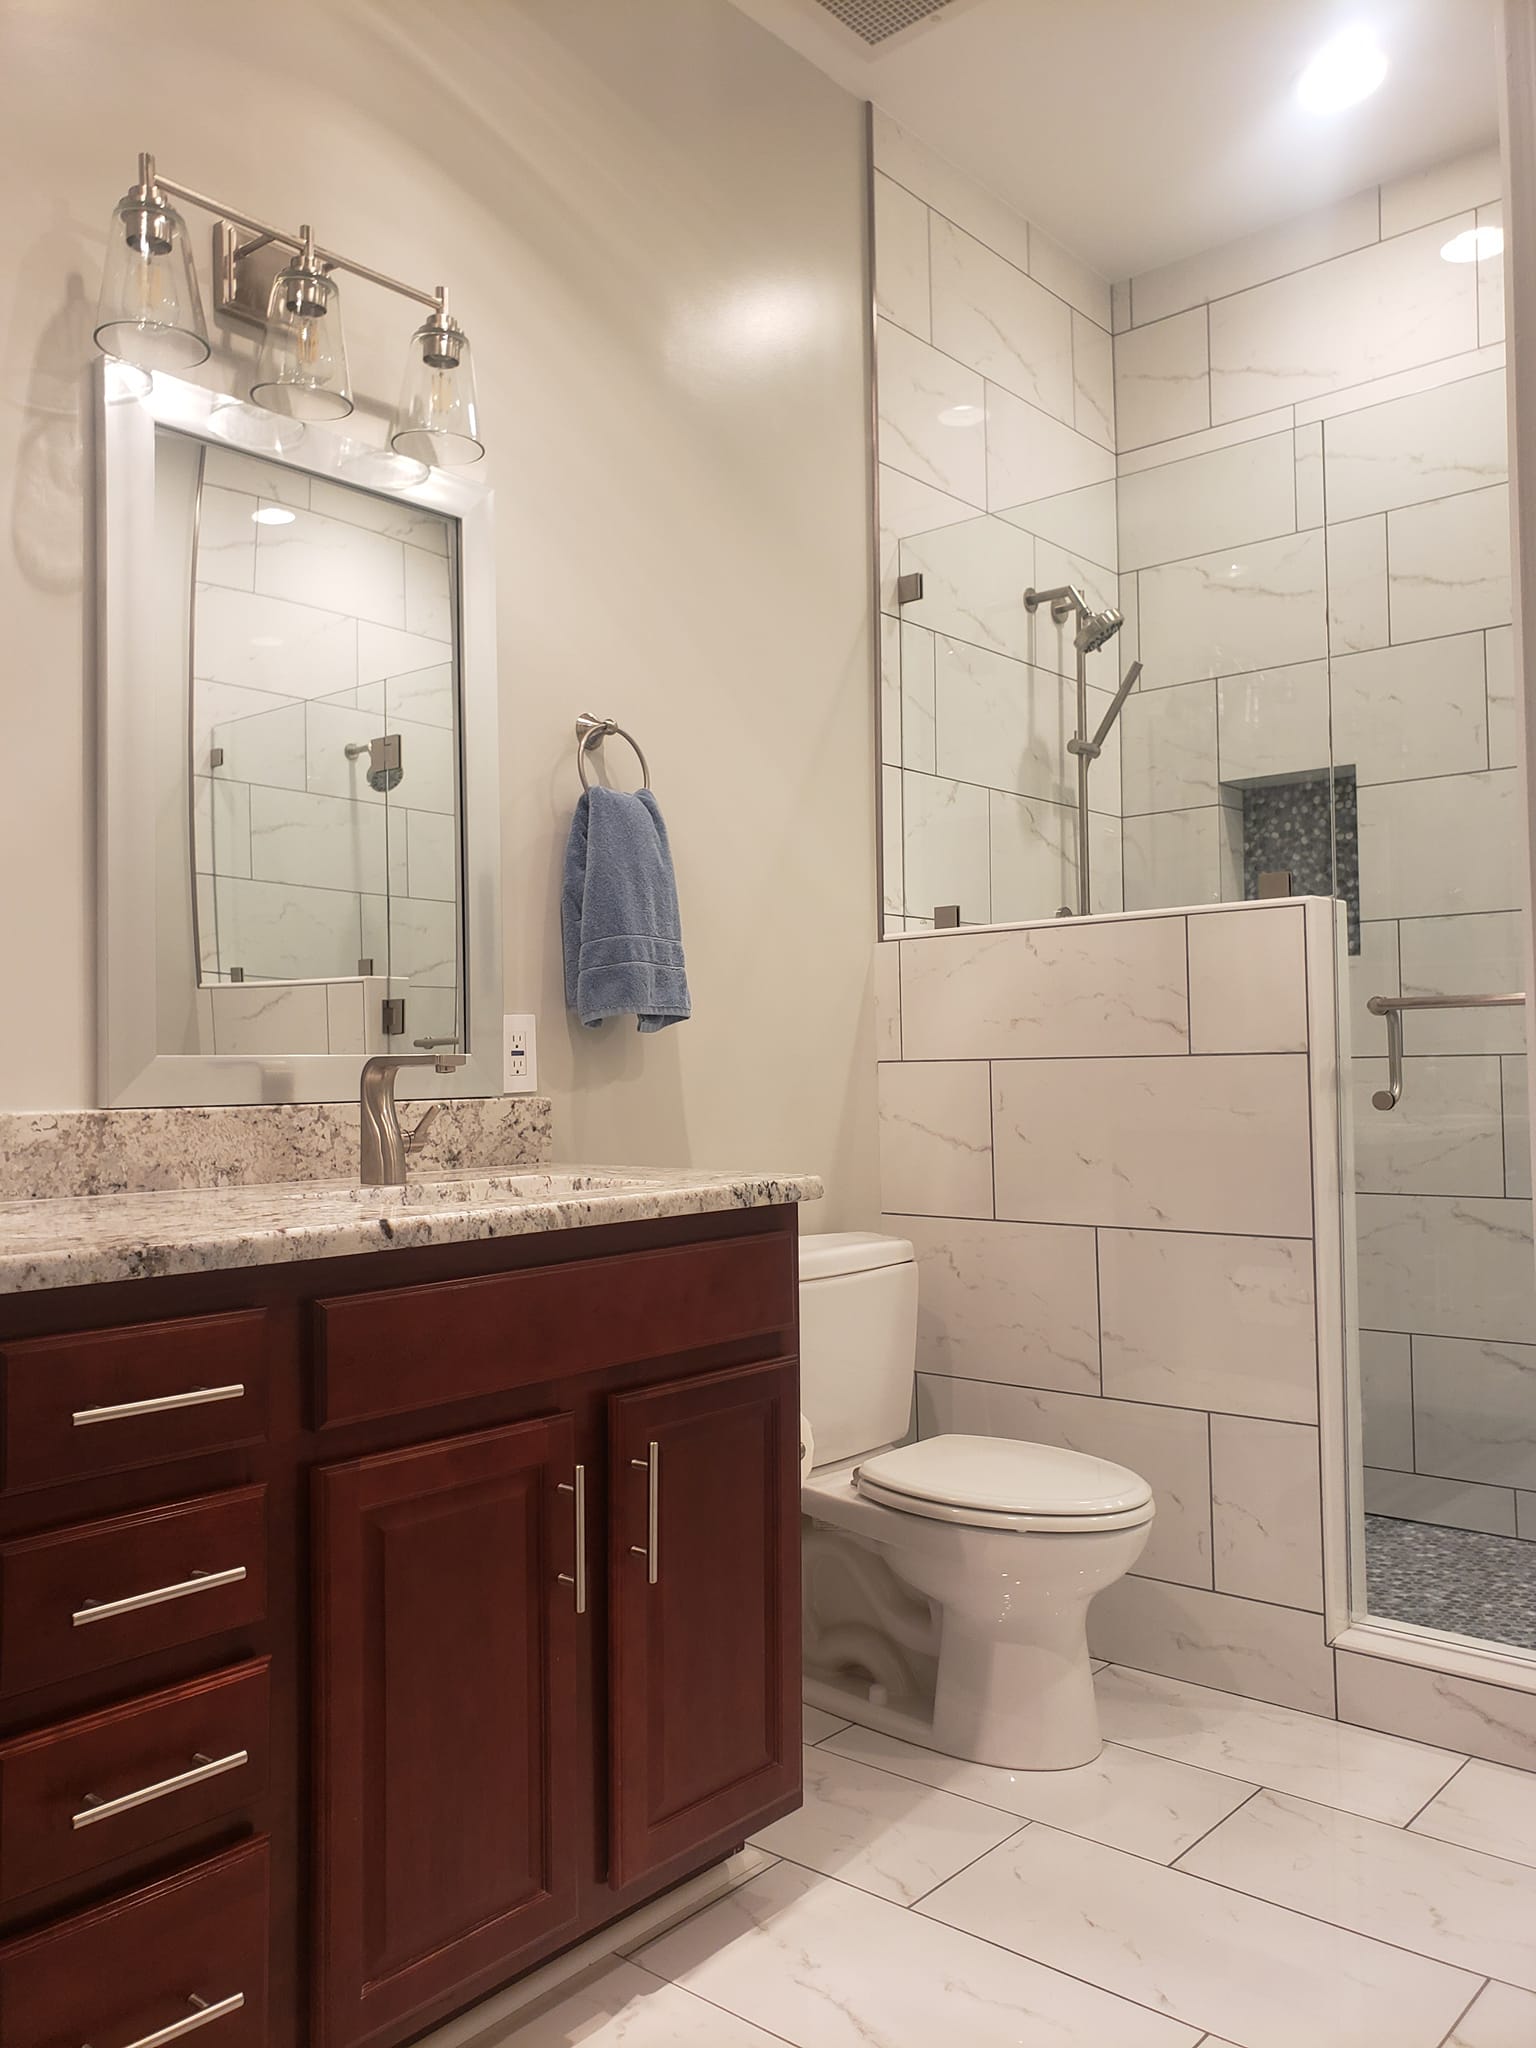 Maintain It Right_Inside Services_Bathroom Remodel